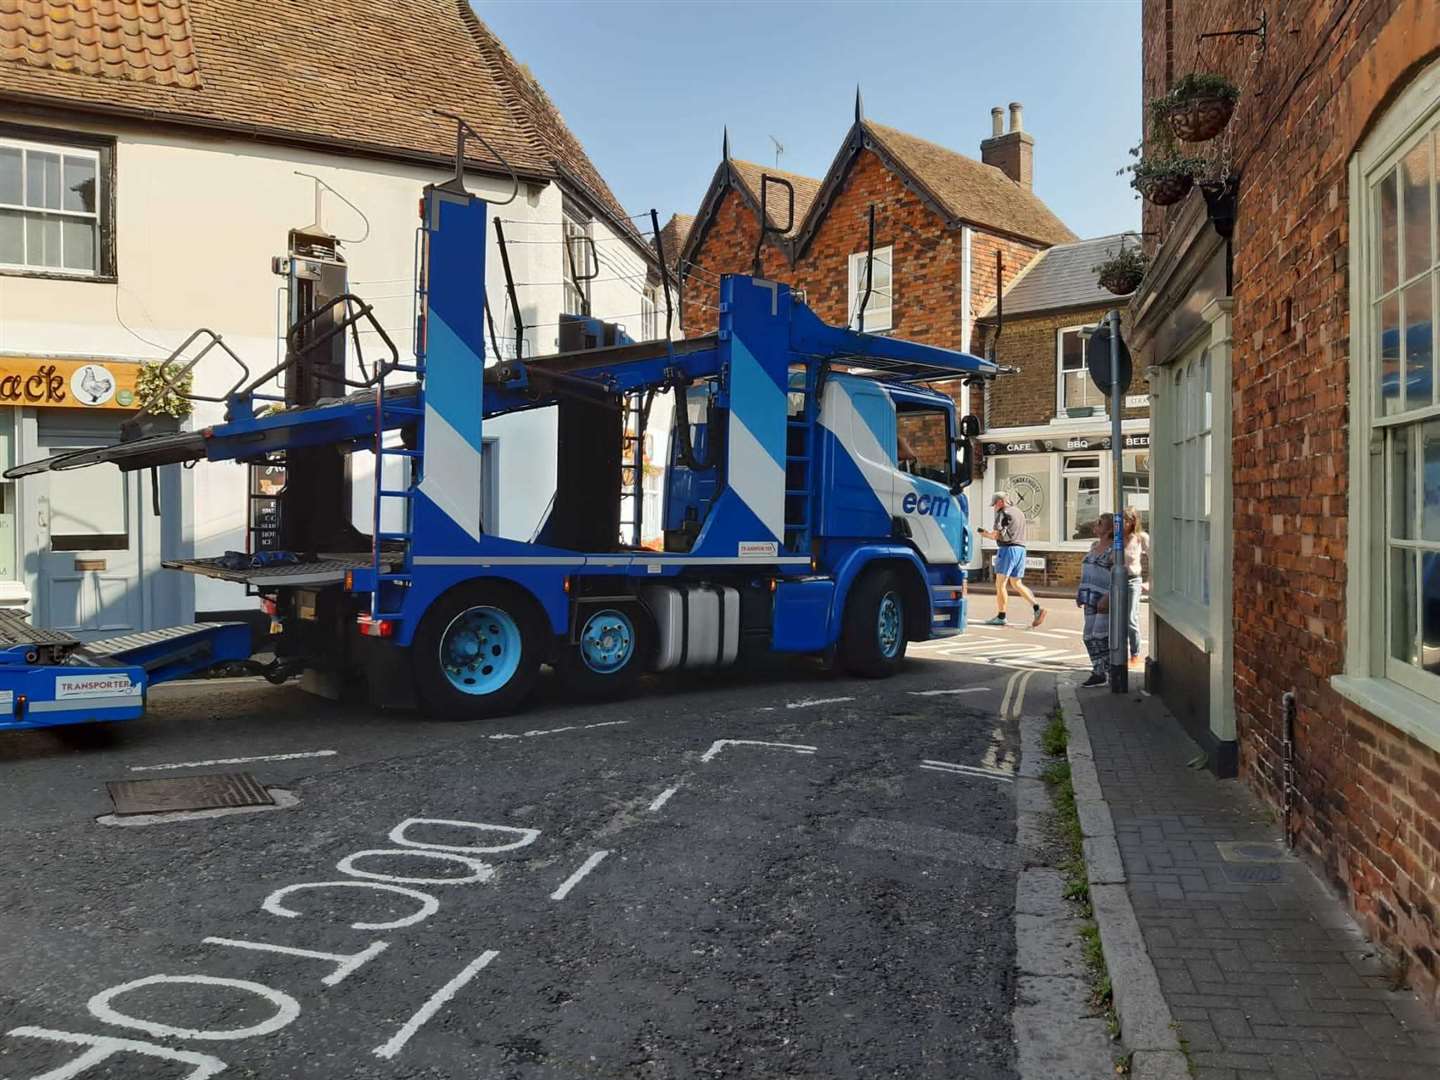 The stuck lorry in Harnet Street, Sandwich, trying to turn right into Strand Street